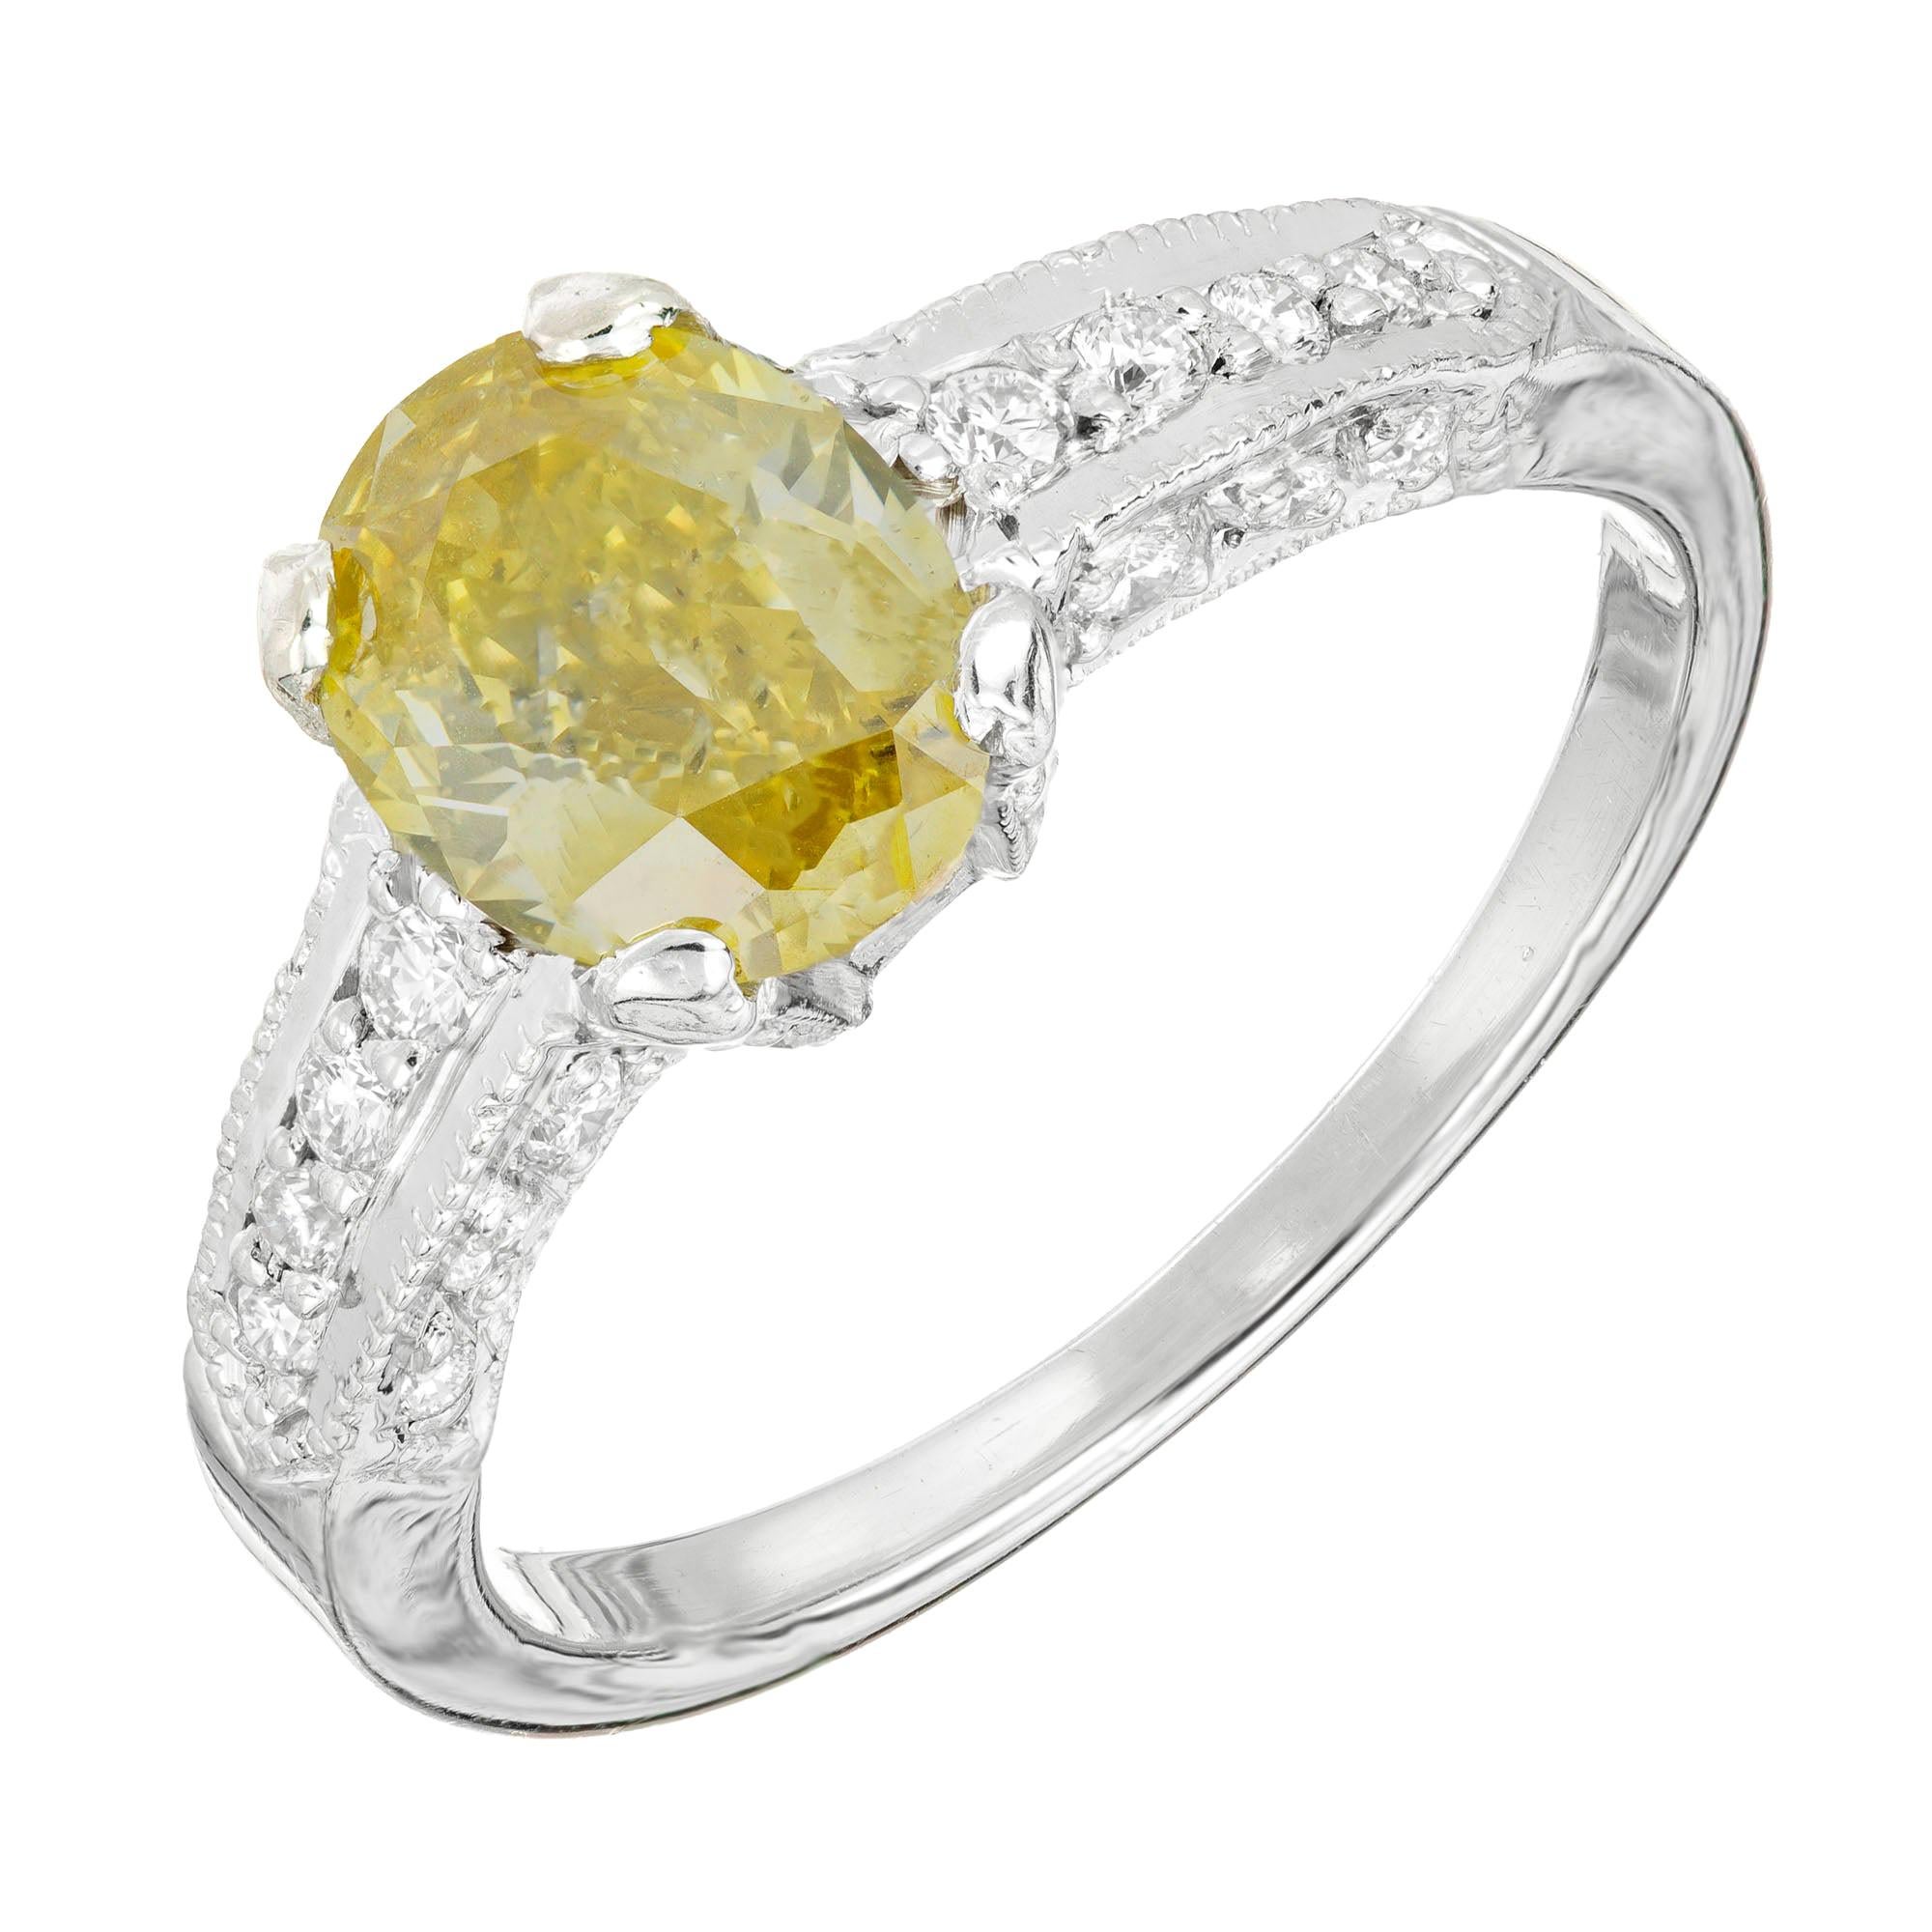 GIA Certified 1.07 Carat Oval Fancy Yellow Diamond Platinum Engagement Ring